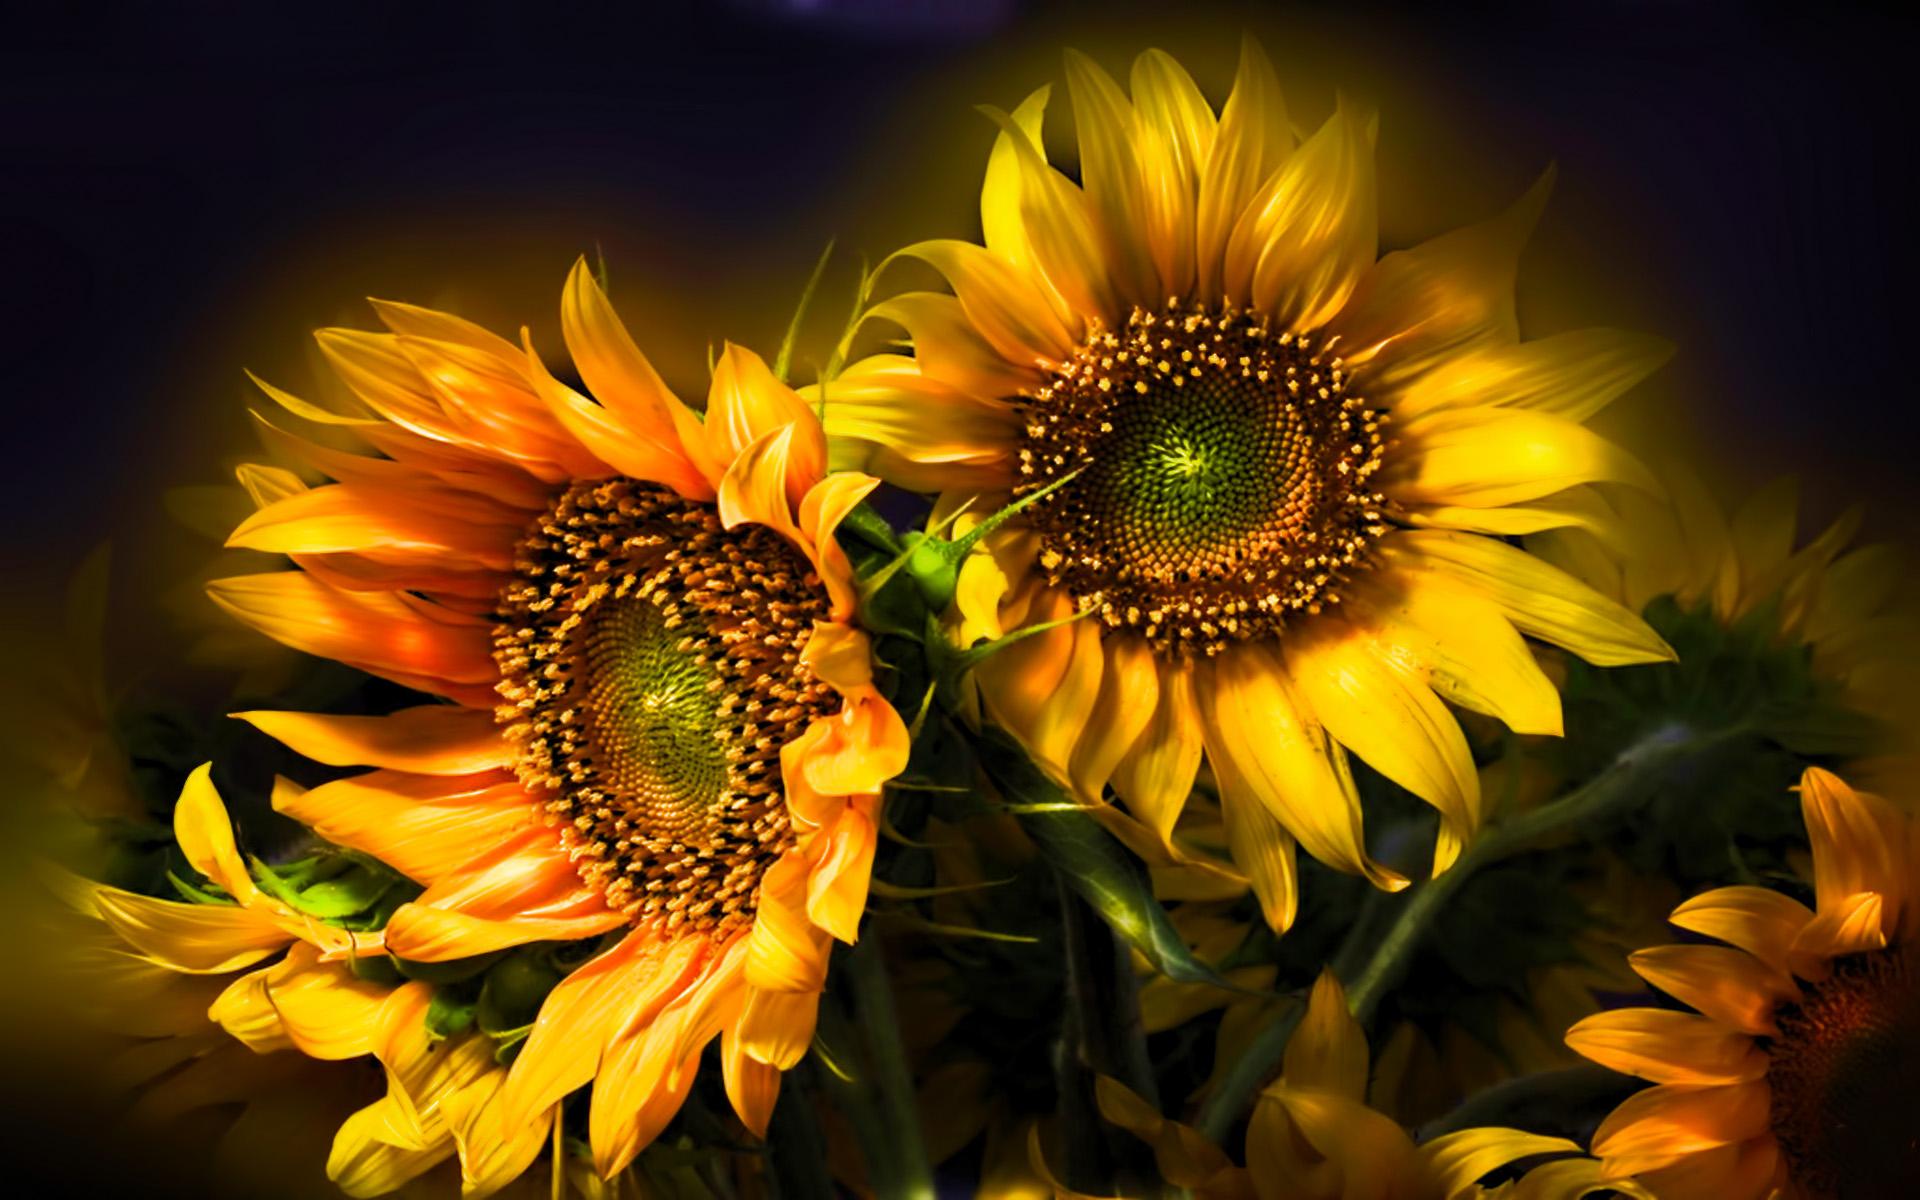 nature, Flowers, Still, Life, Bouquets, Sunflowers, Seed